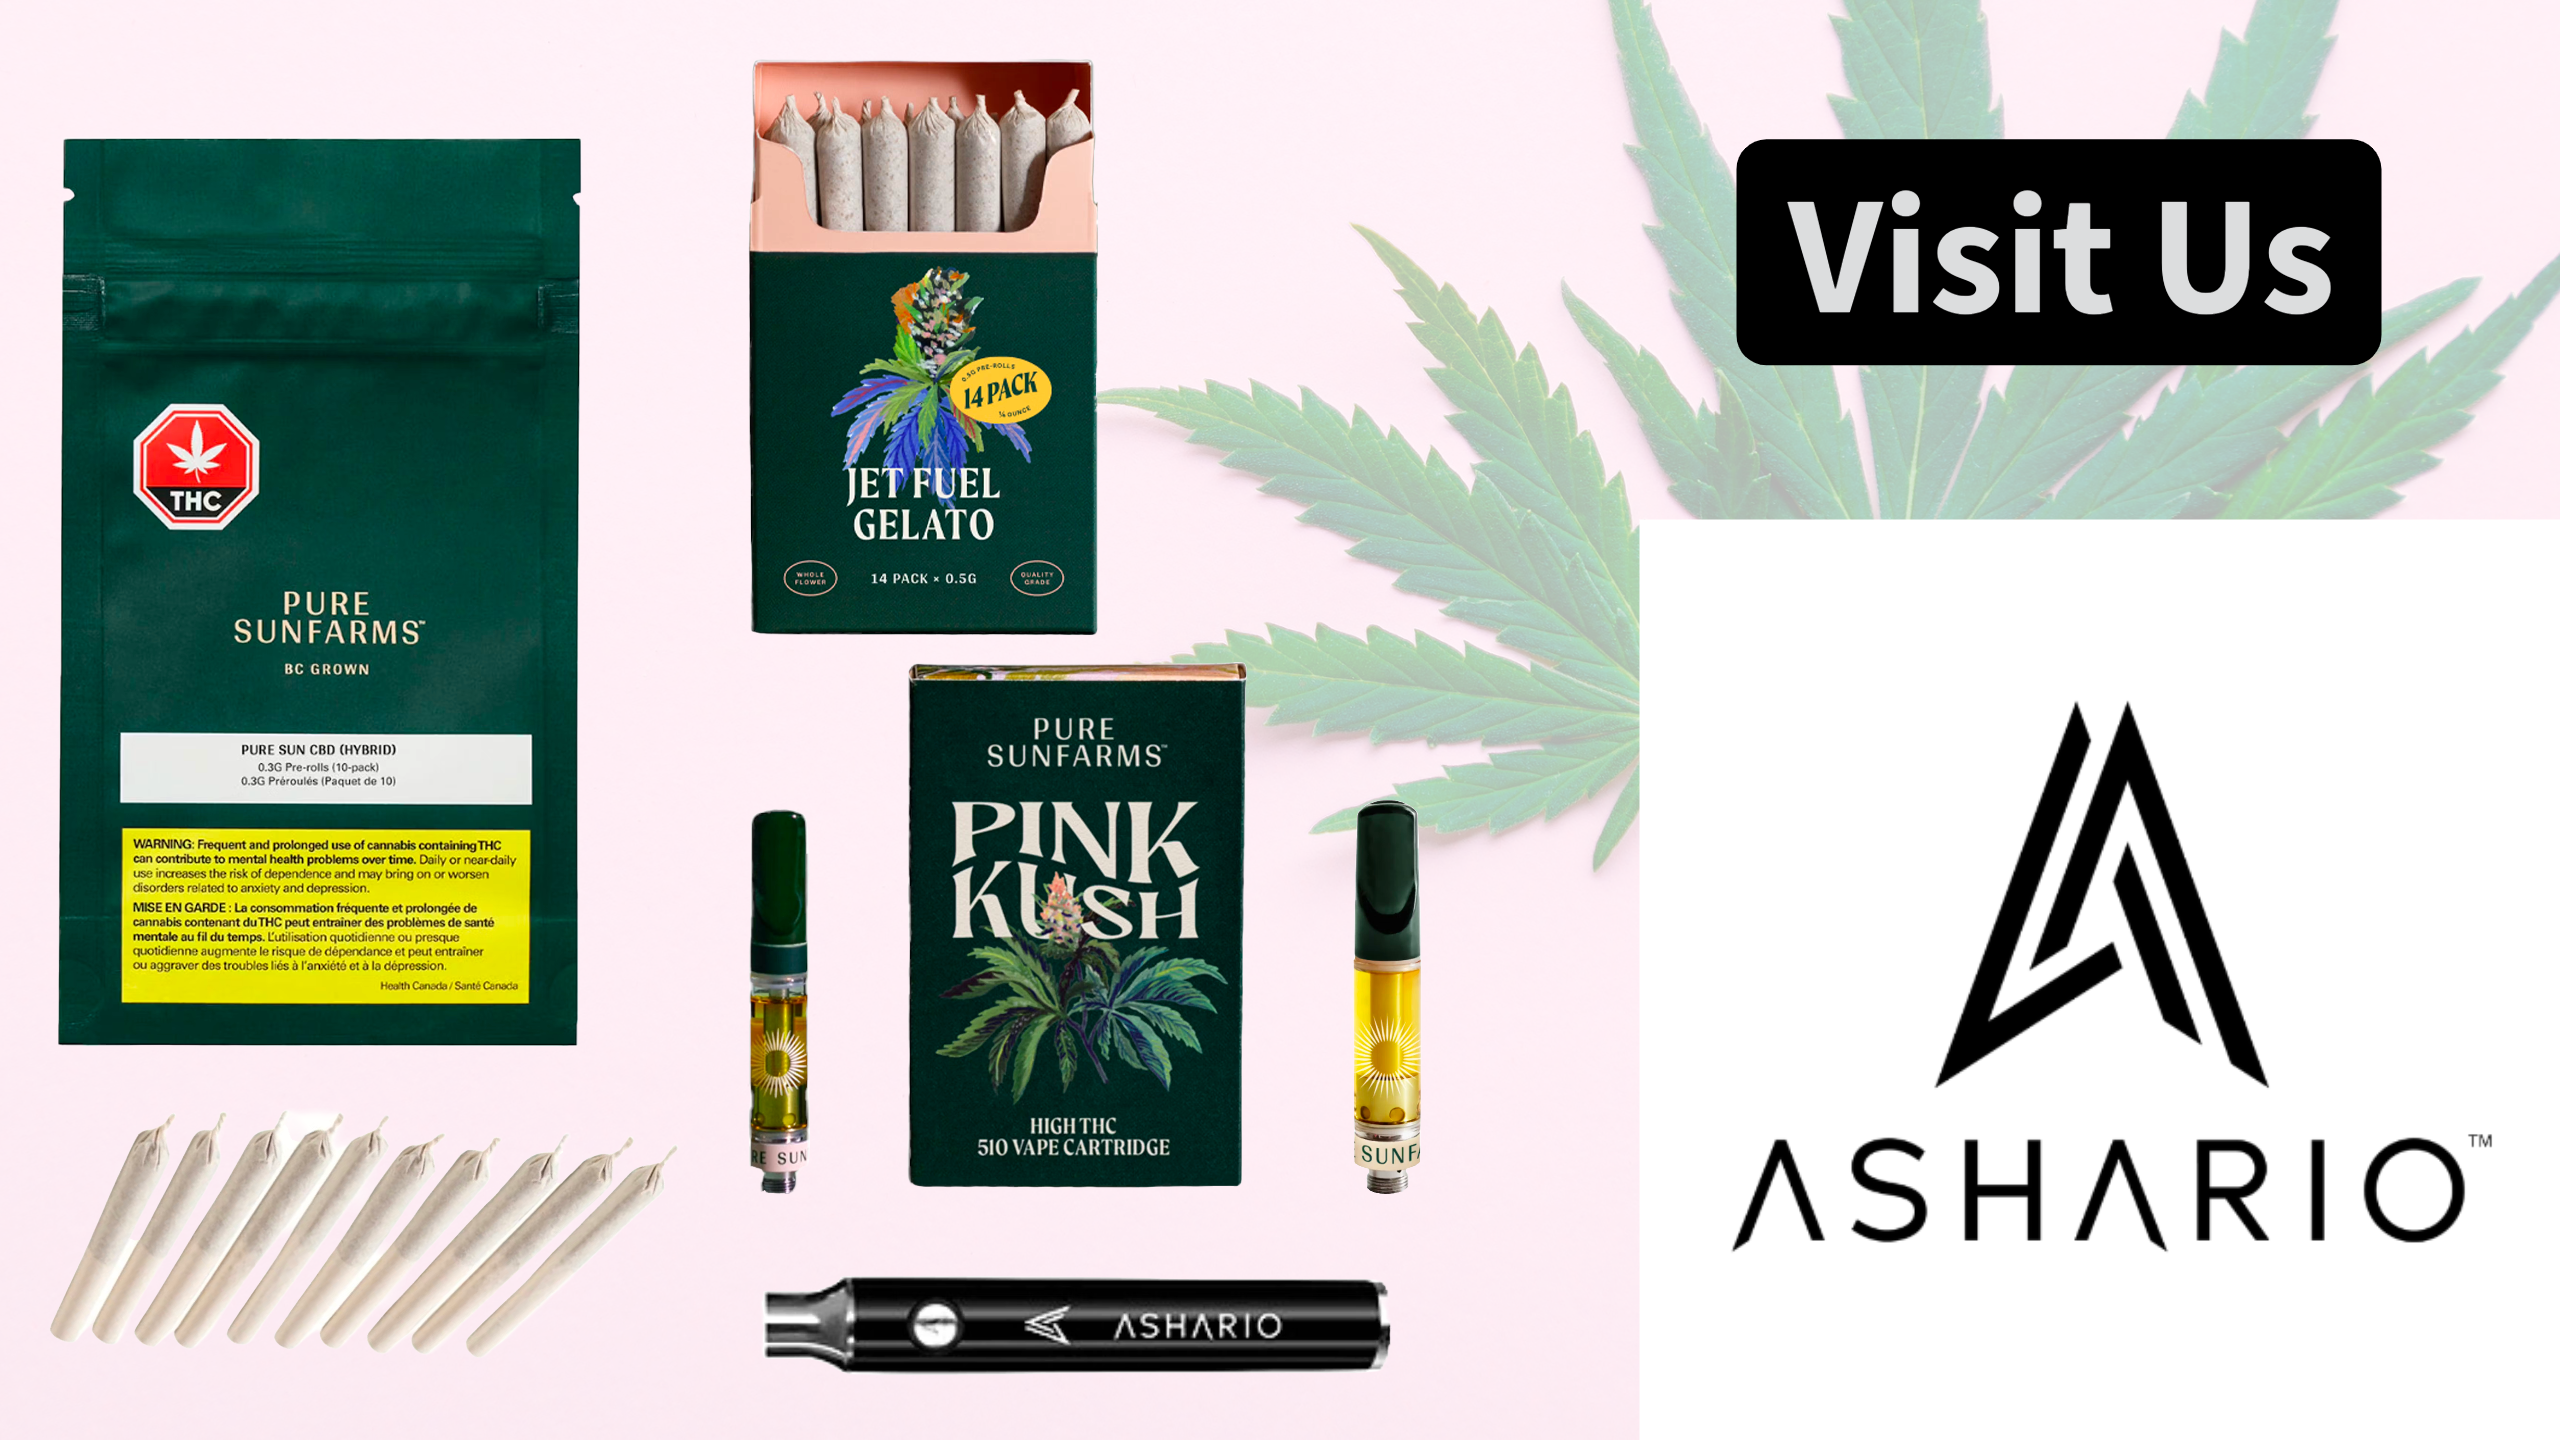 Experience the epitome of quality cannabis with Pure Sunfarms, now available at Ashario Cannabis.